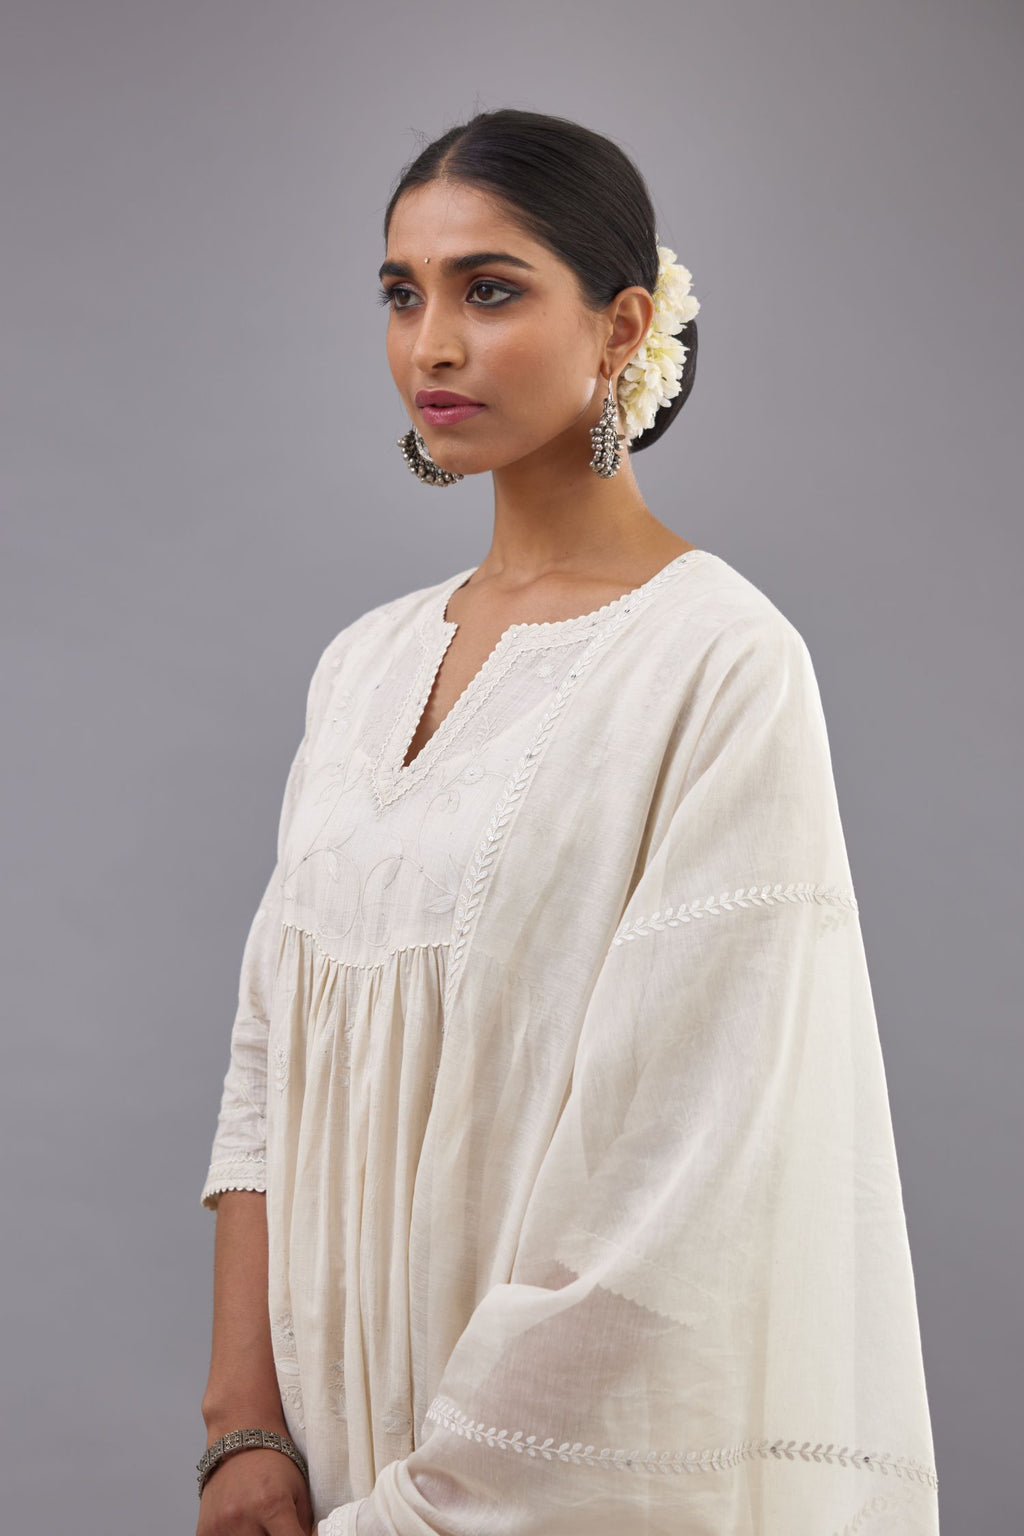 Handspun handwoven cotton  kurta set with wavy empire waistline and gathers, highlighted with all-over tonal colored thread embroidery and ric-rac detail.